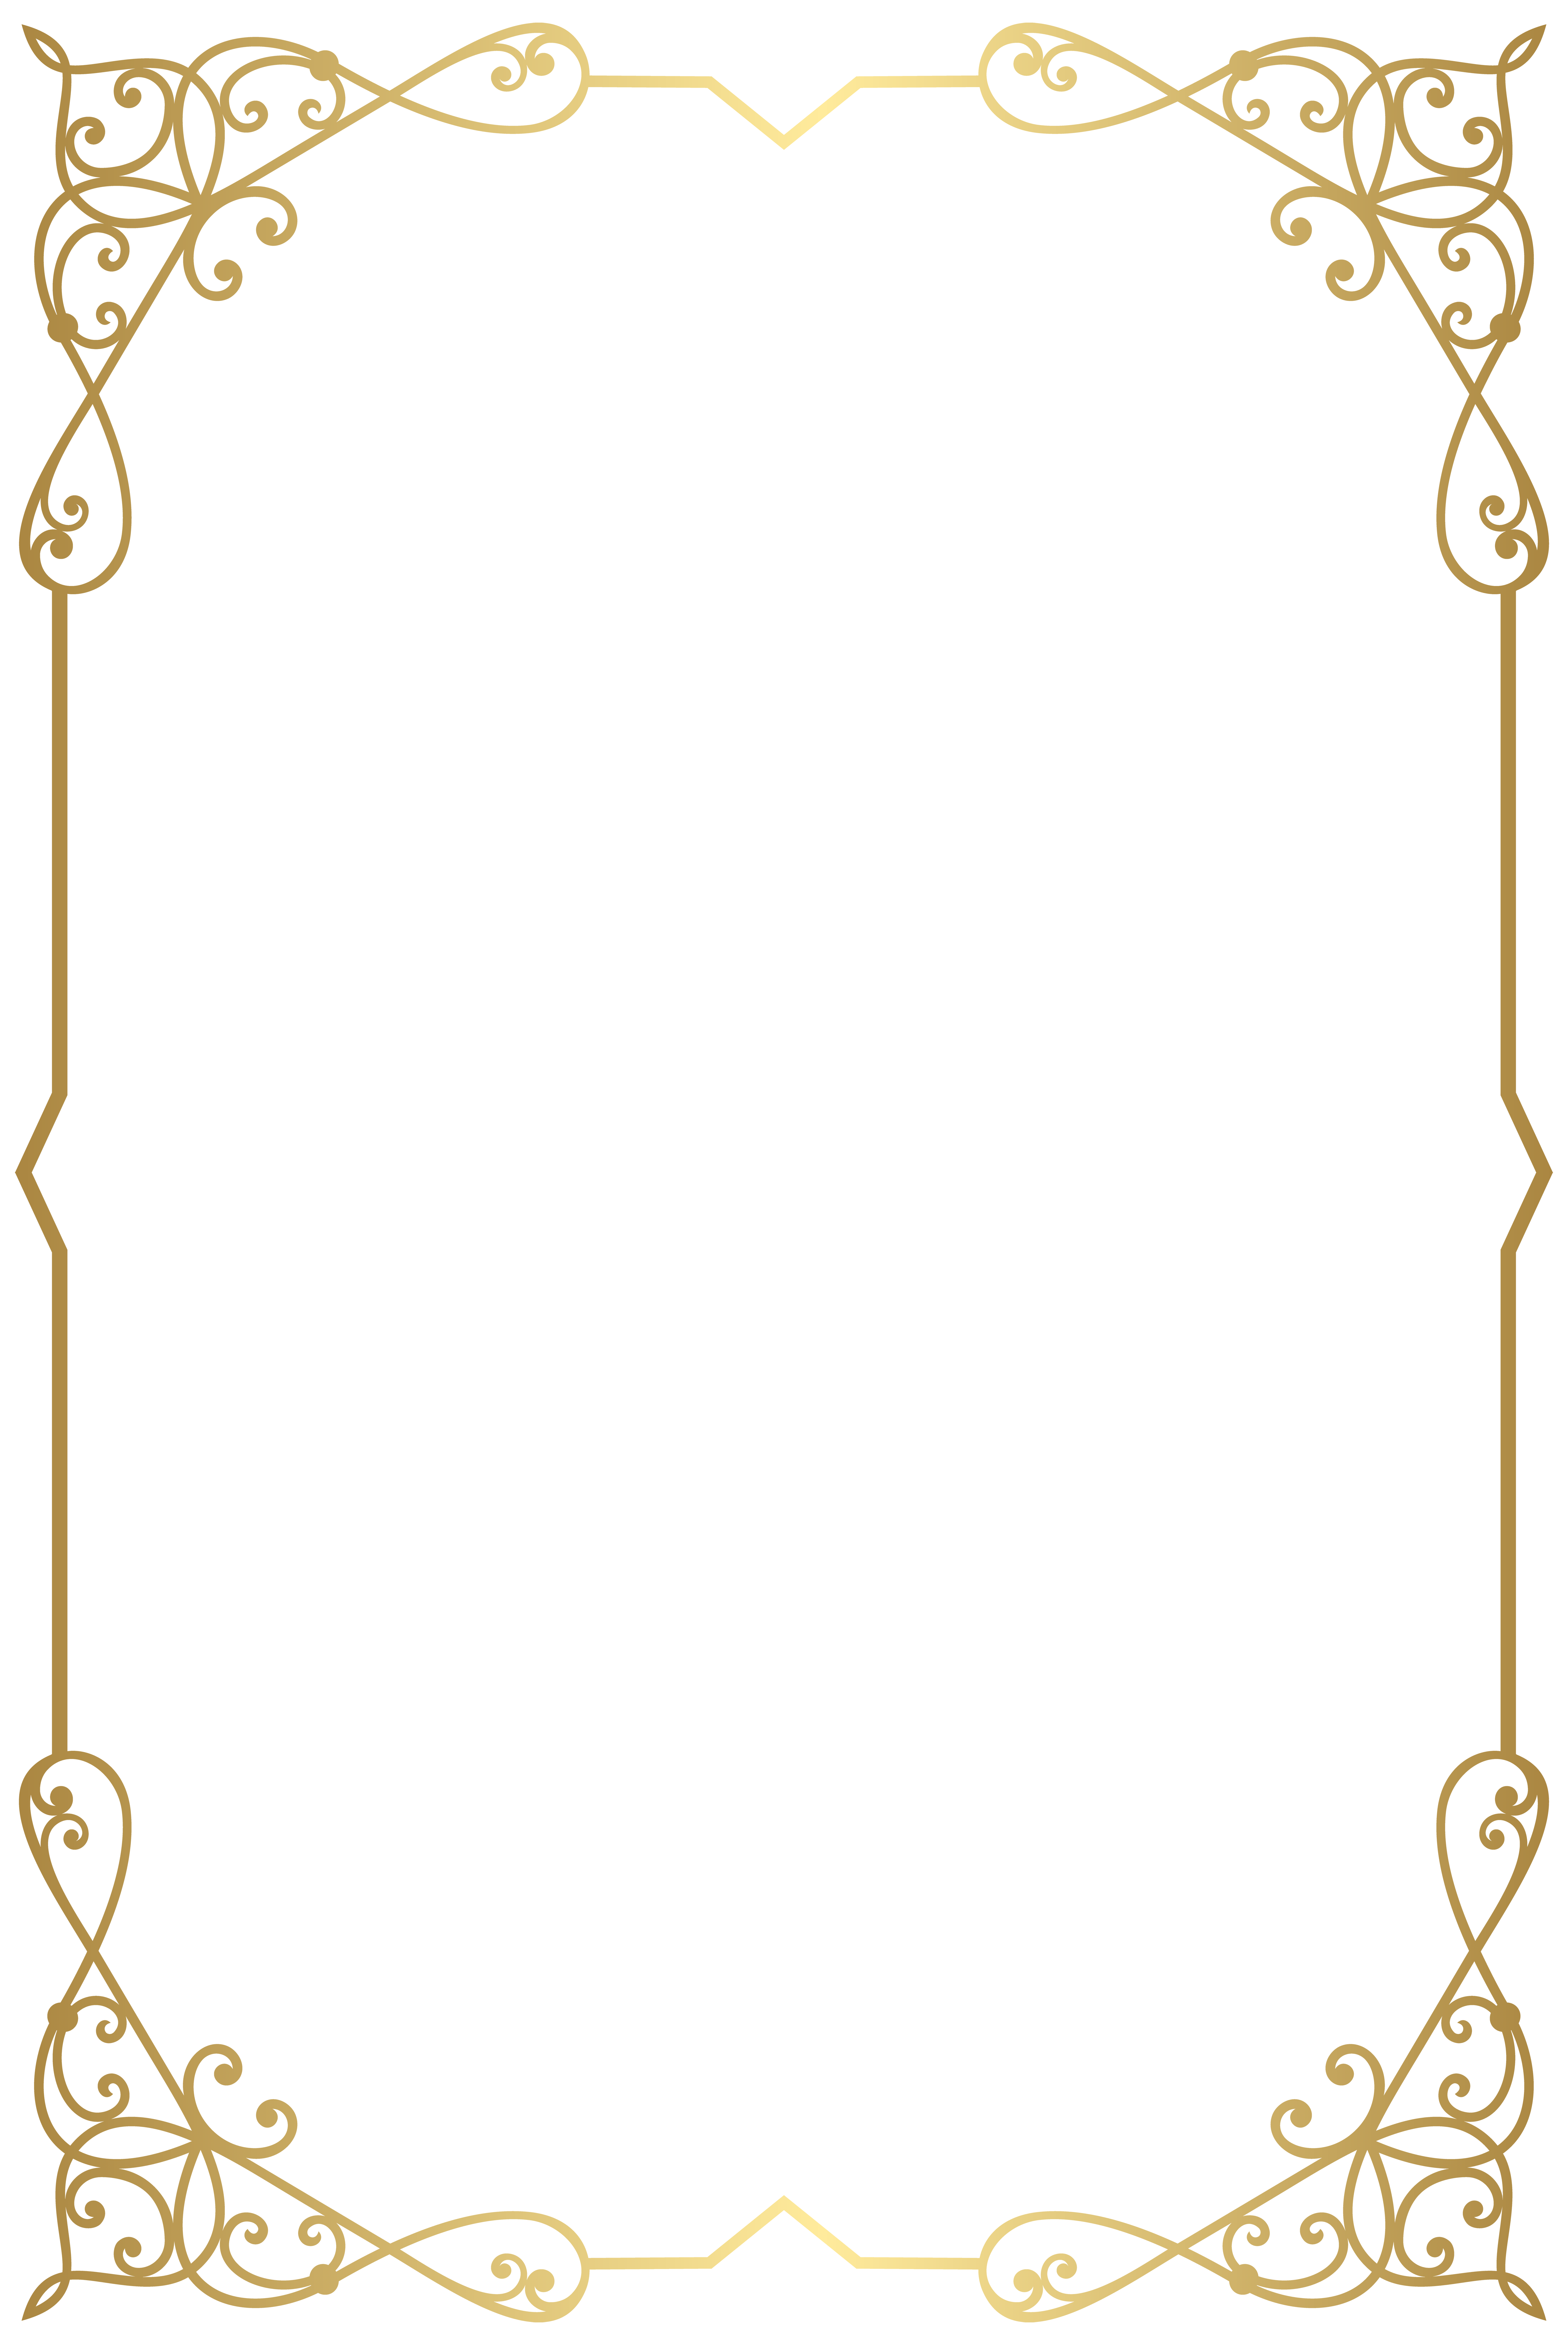 Fancy Page Border Png / Download and use them in your website, document